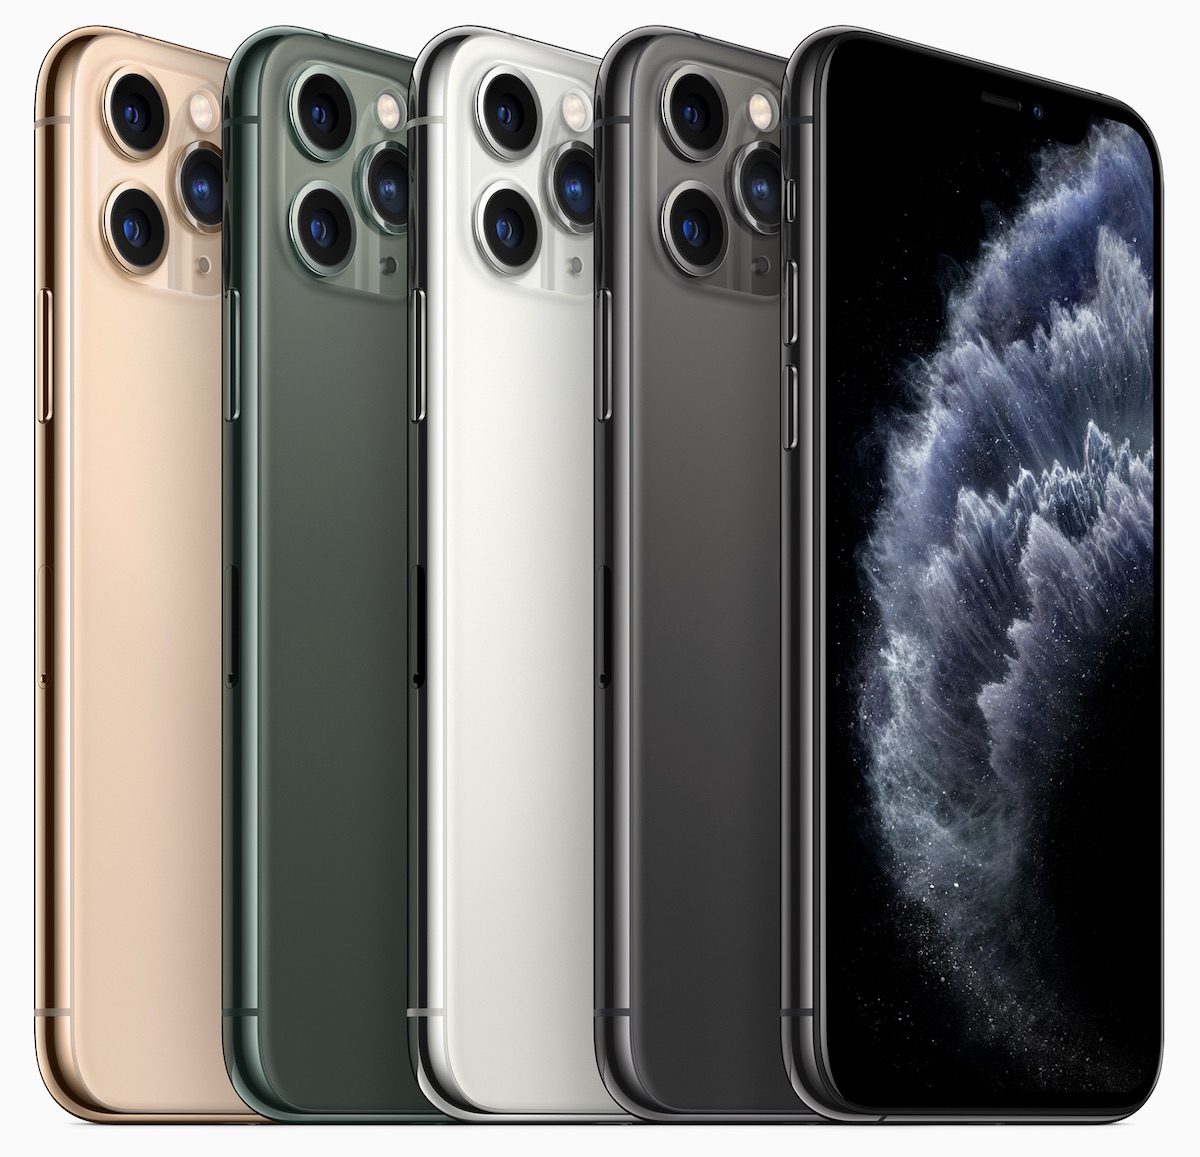 Apple Announces iPhone 11 Pro and iPhone 11 Pro Max With Triple-Lens Rear Camera and Midnight Green 